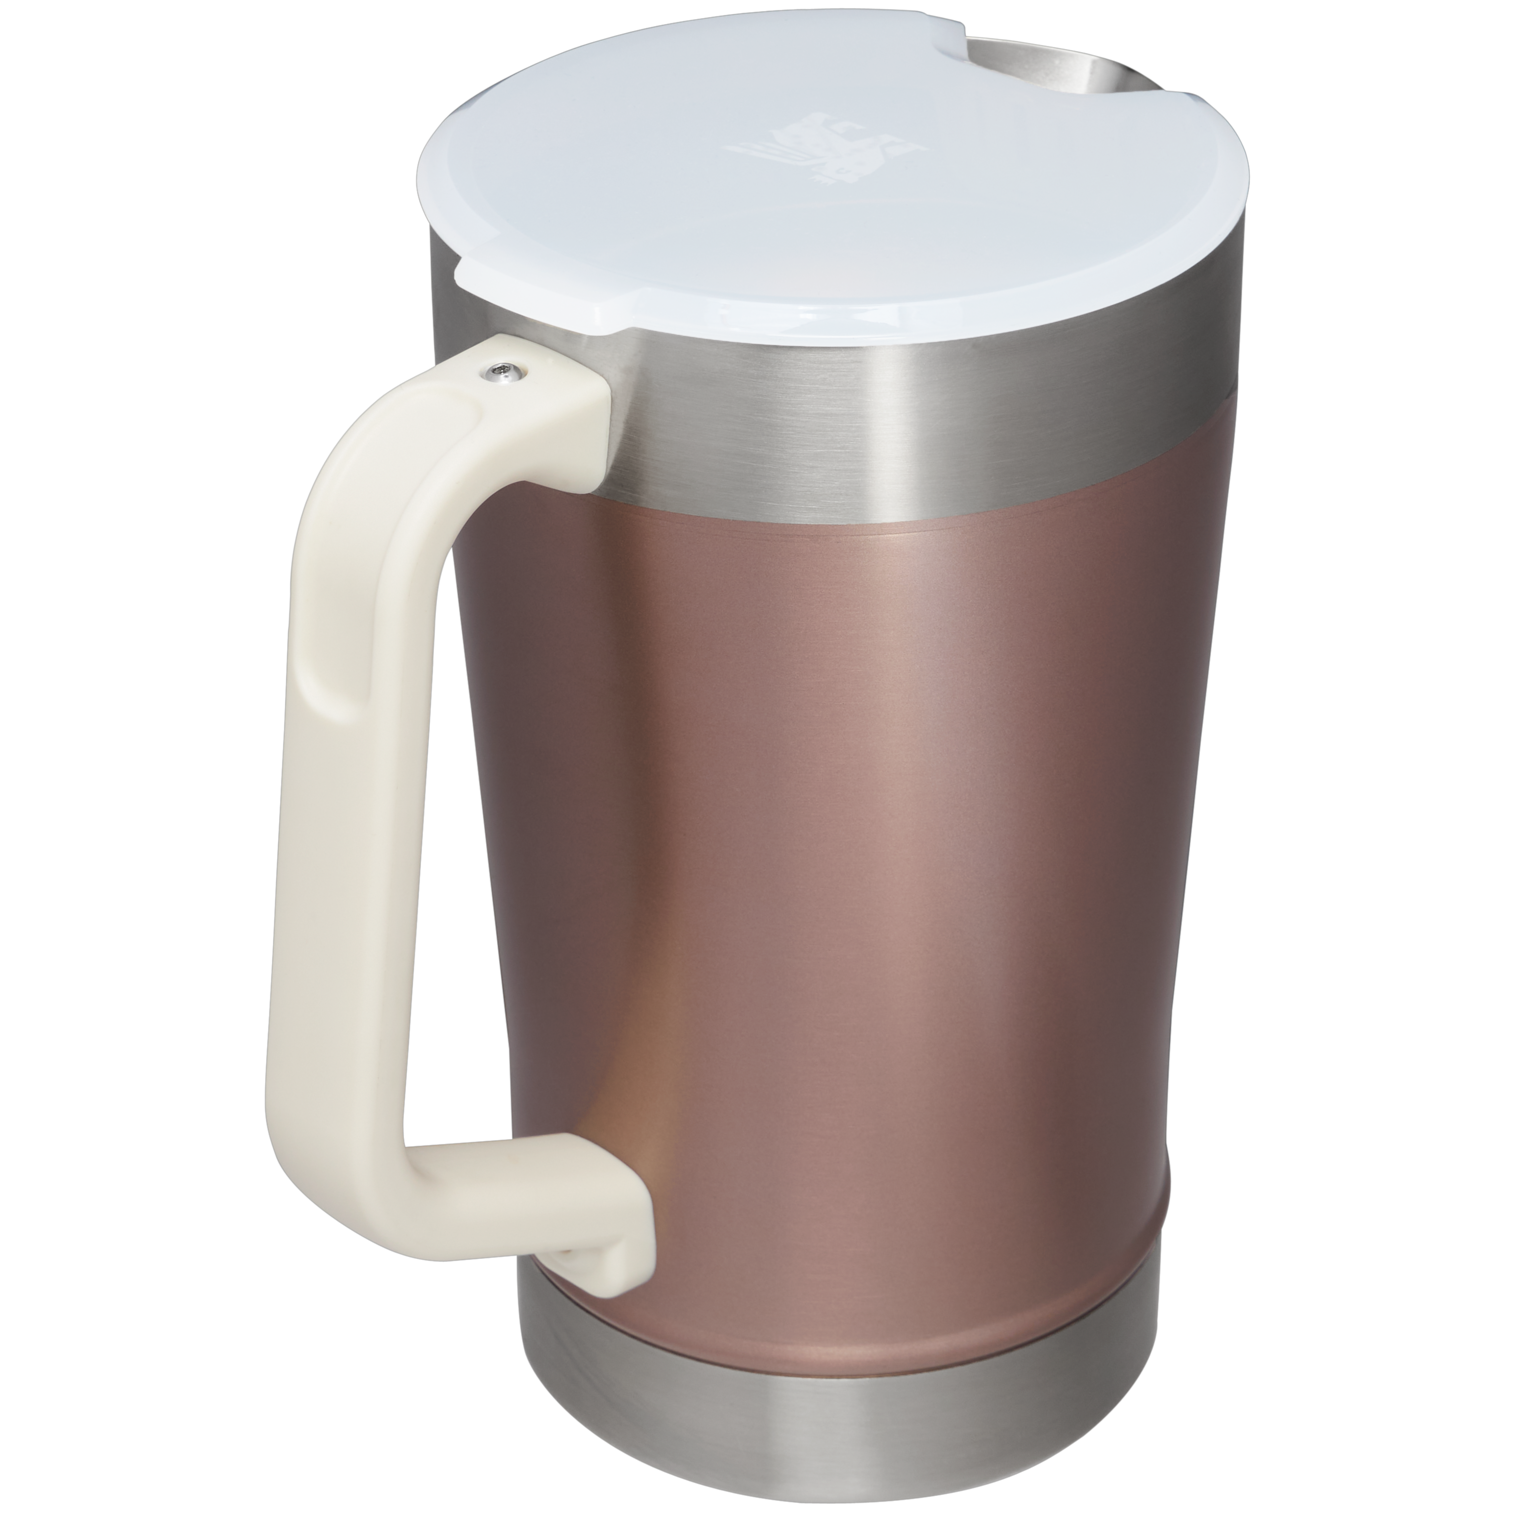 Stanley 64 Oz Classic Stay Chill Pitcher Custom Engraved